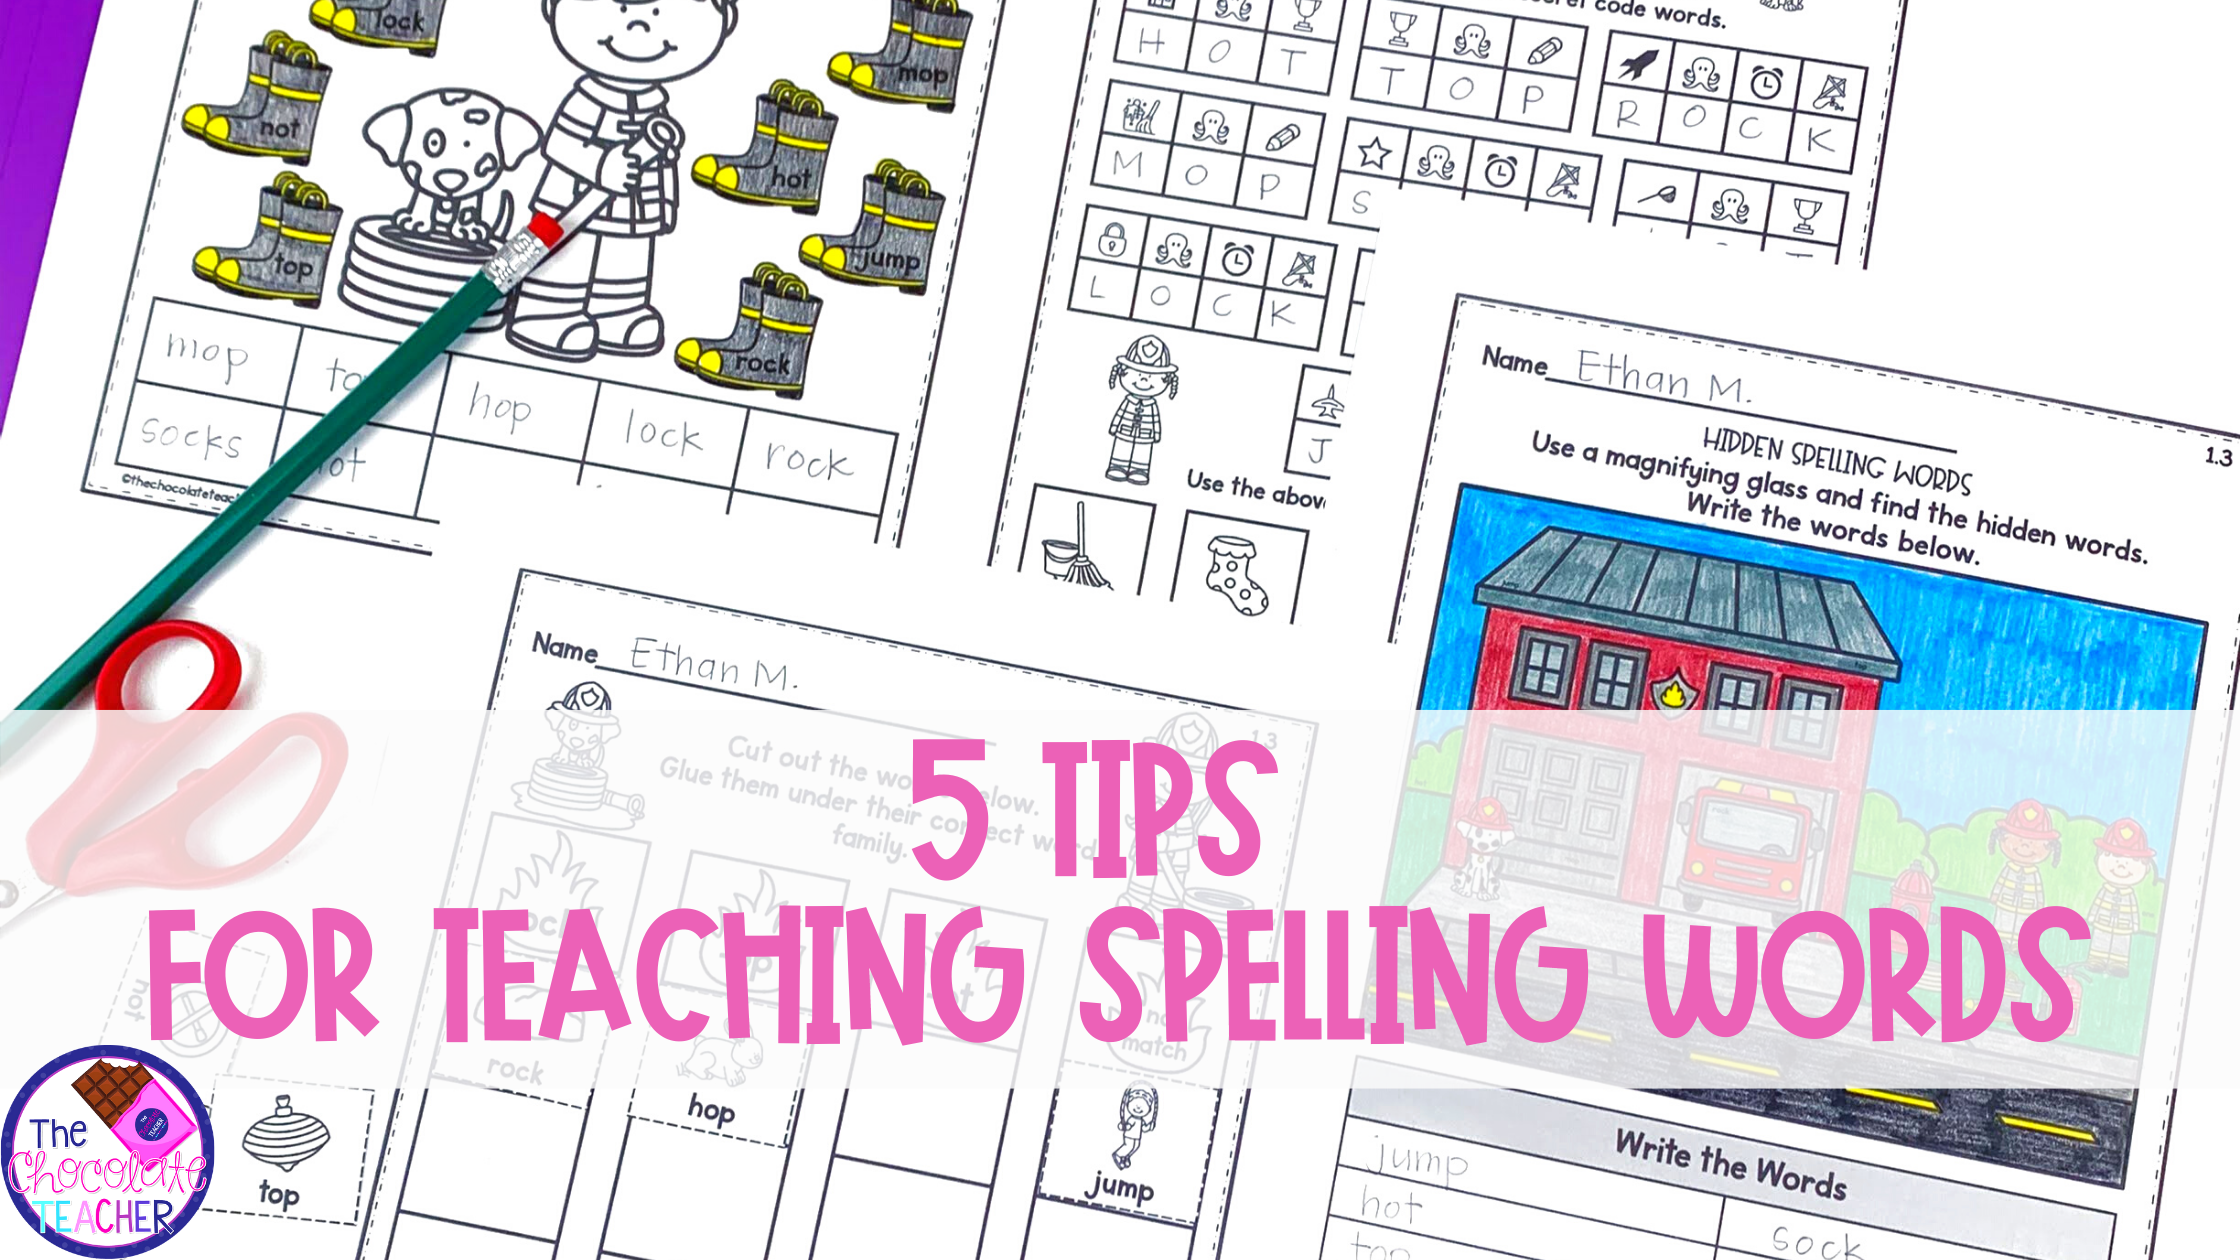 Use these 5 helpful tips for teaching spelling words in your classroom today.